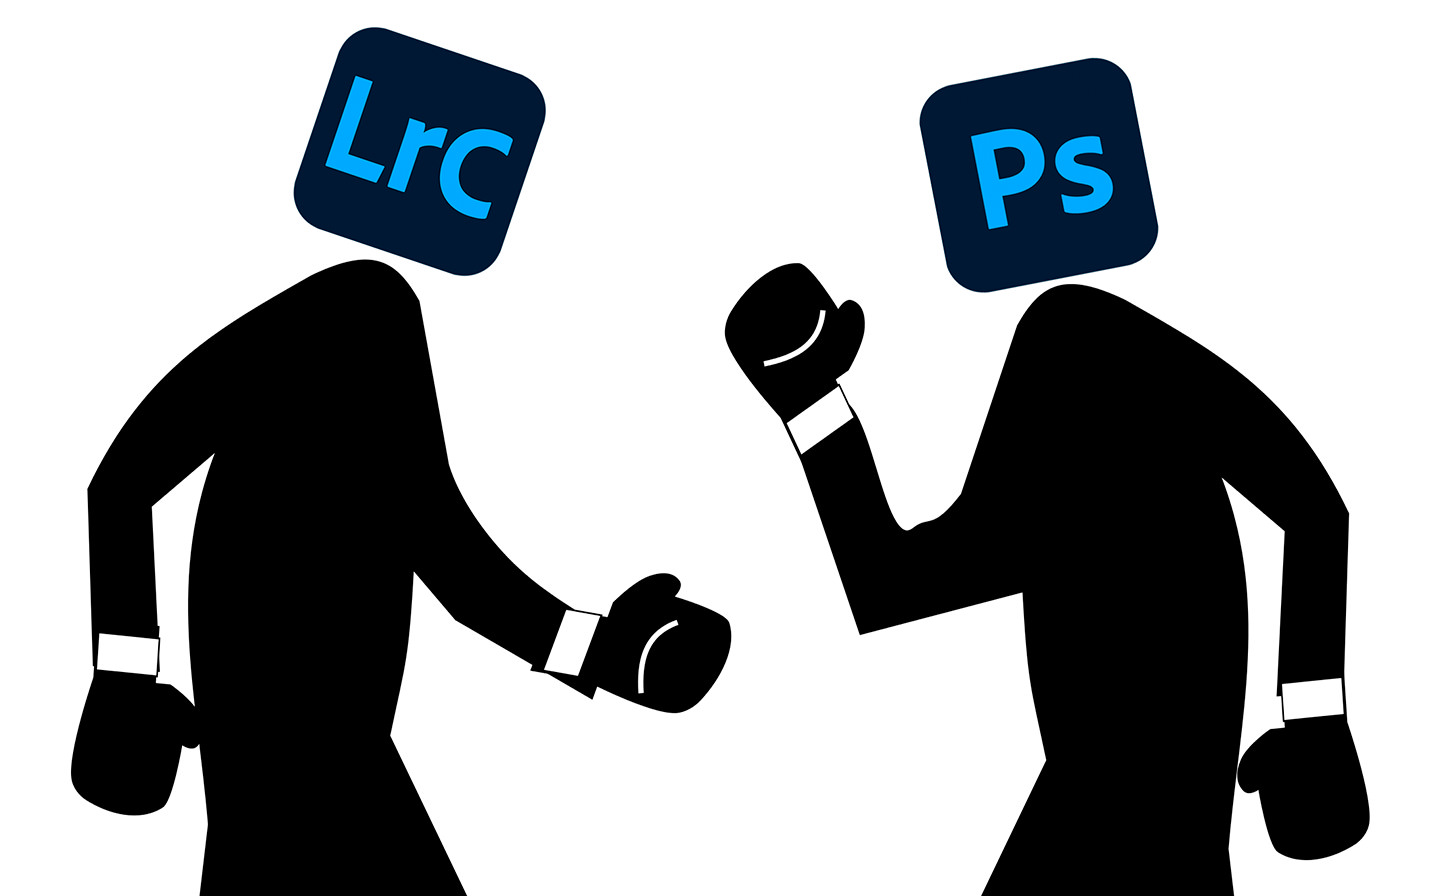 Lightroom verses Photoshop, What are the Differences?<span class="rmp-archive-results-widget rmp-archive-results-widget--not-rated"><i class=" rmp-icon rmp-icon--ratings rmp-icon--star "></i><i class=" rmp-icon rmp-icon--ratings rmp-icon--star "></i><i class=" rmp-icon rmp-icon--ratings rmp-icon--star "></i><i class=" rmp-icon rmp-icon--ratings rmp-icon--star "></i><i class=" rmp-icon rmp-icon--ratings rmp-icon--star "></i> <span>0 (0)</span></span>